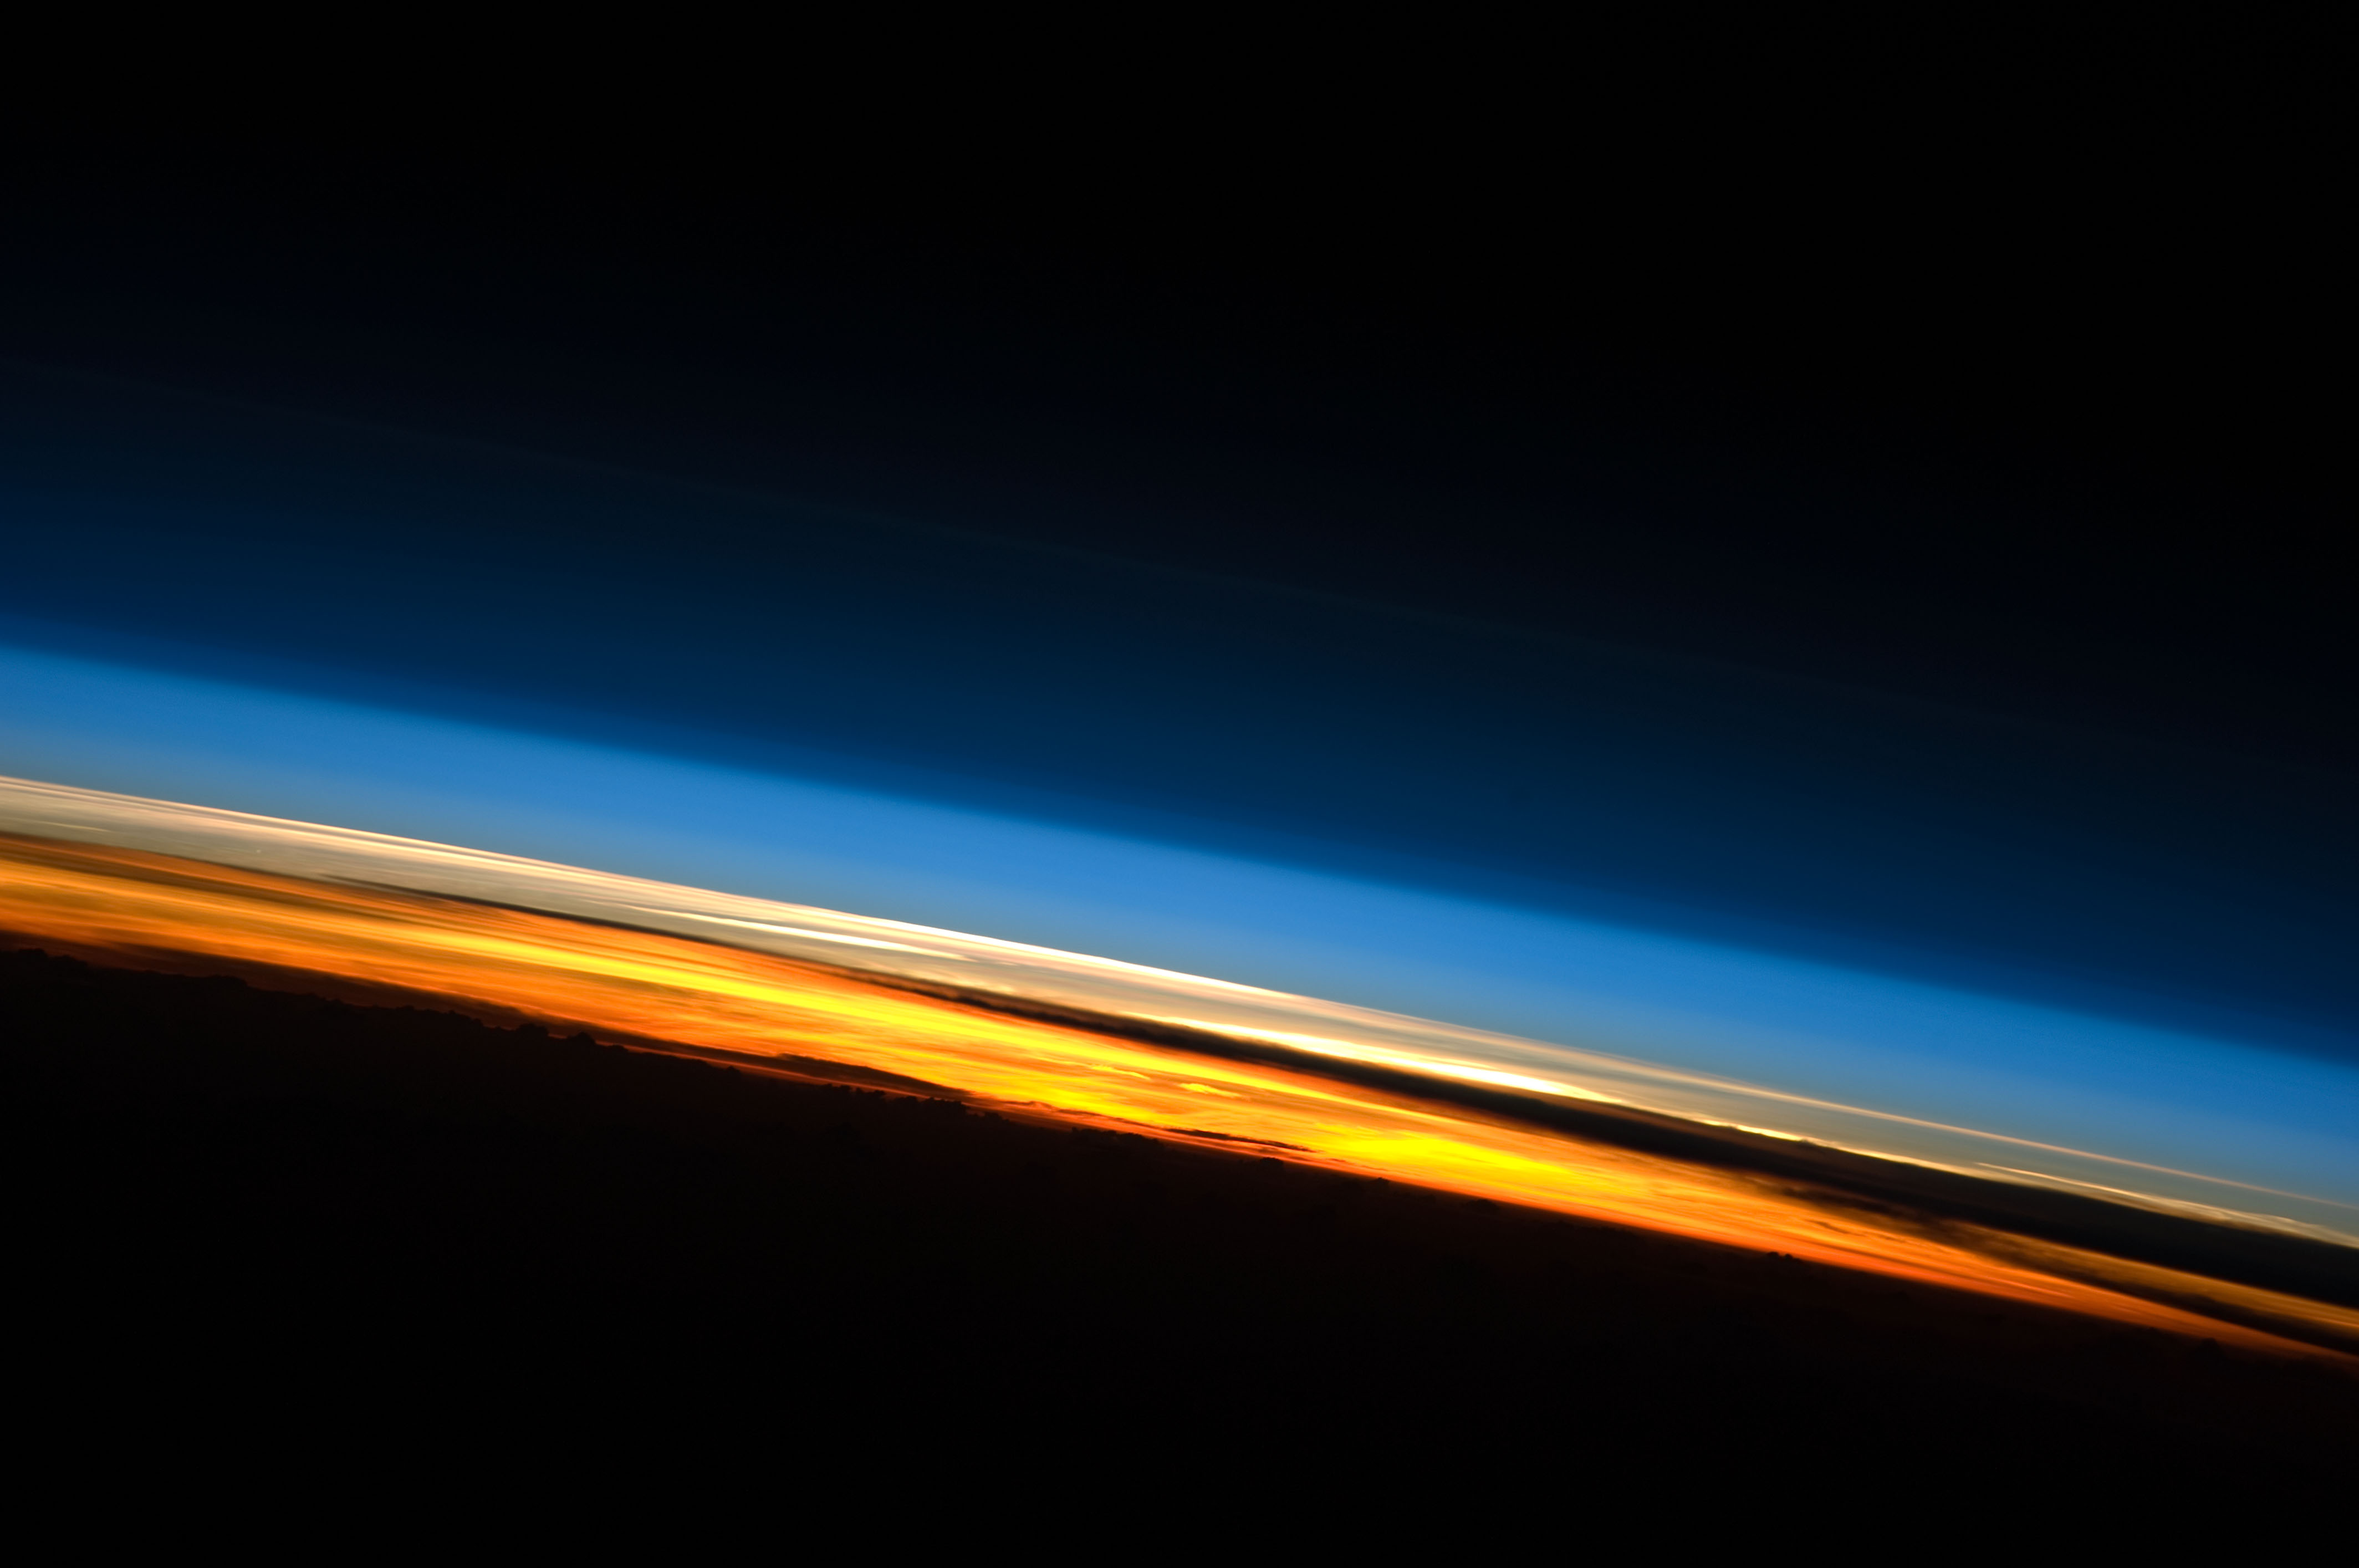 Earth's atmosphere as seen from the ISS